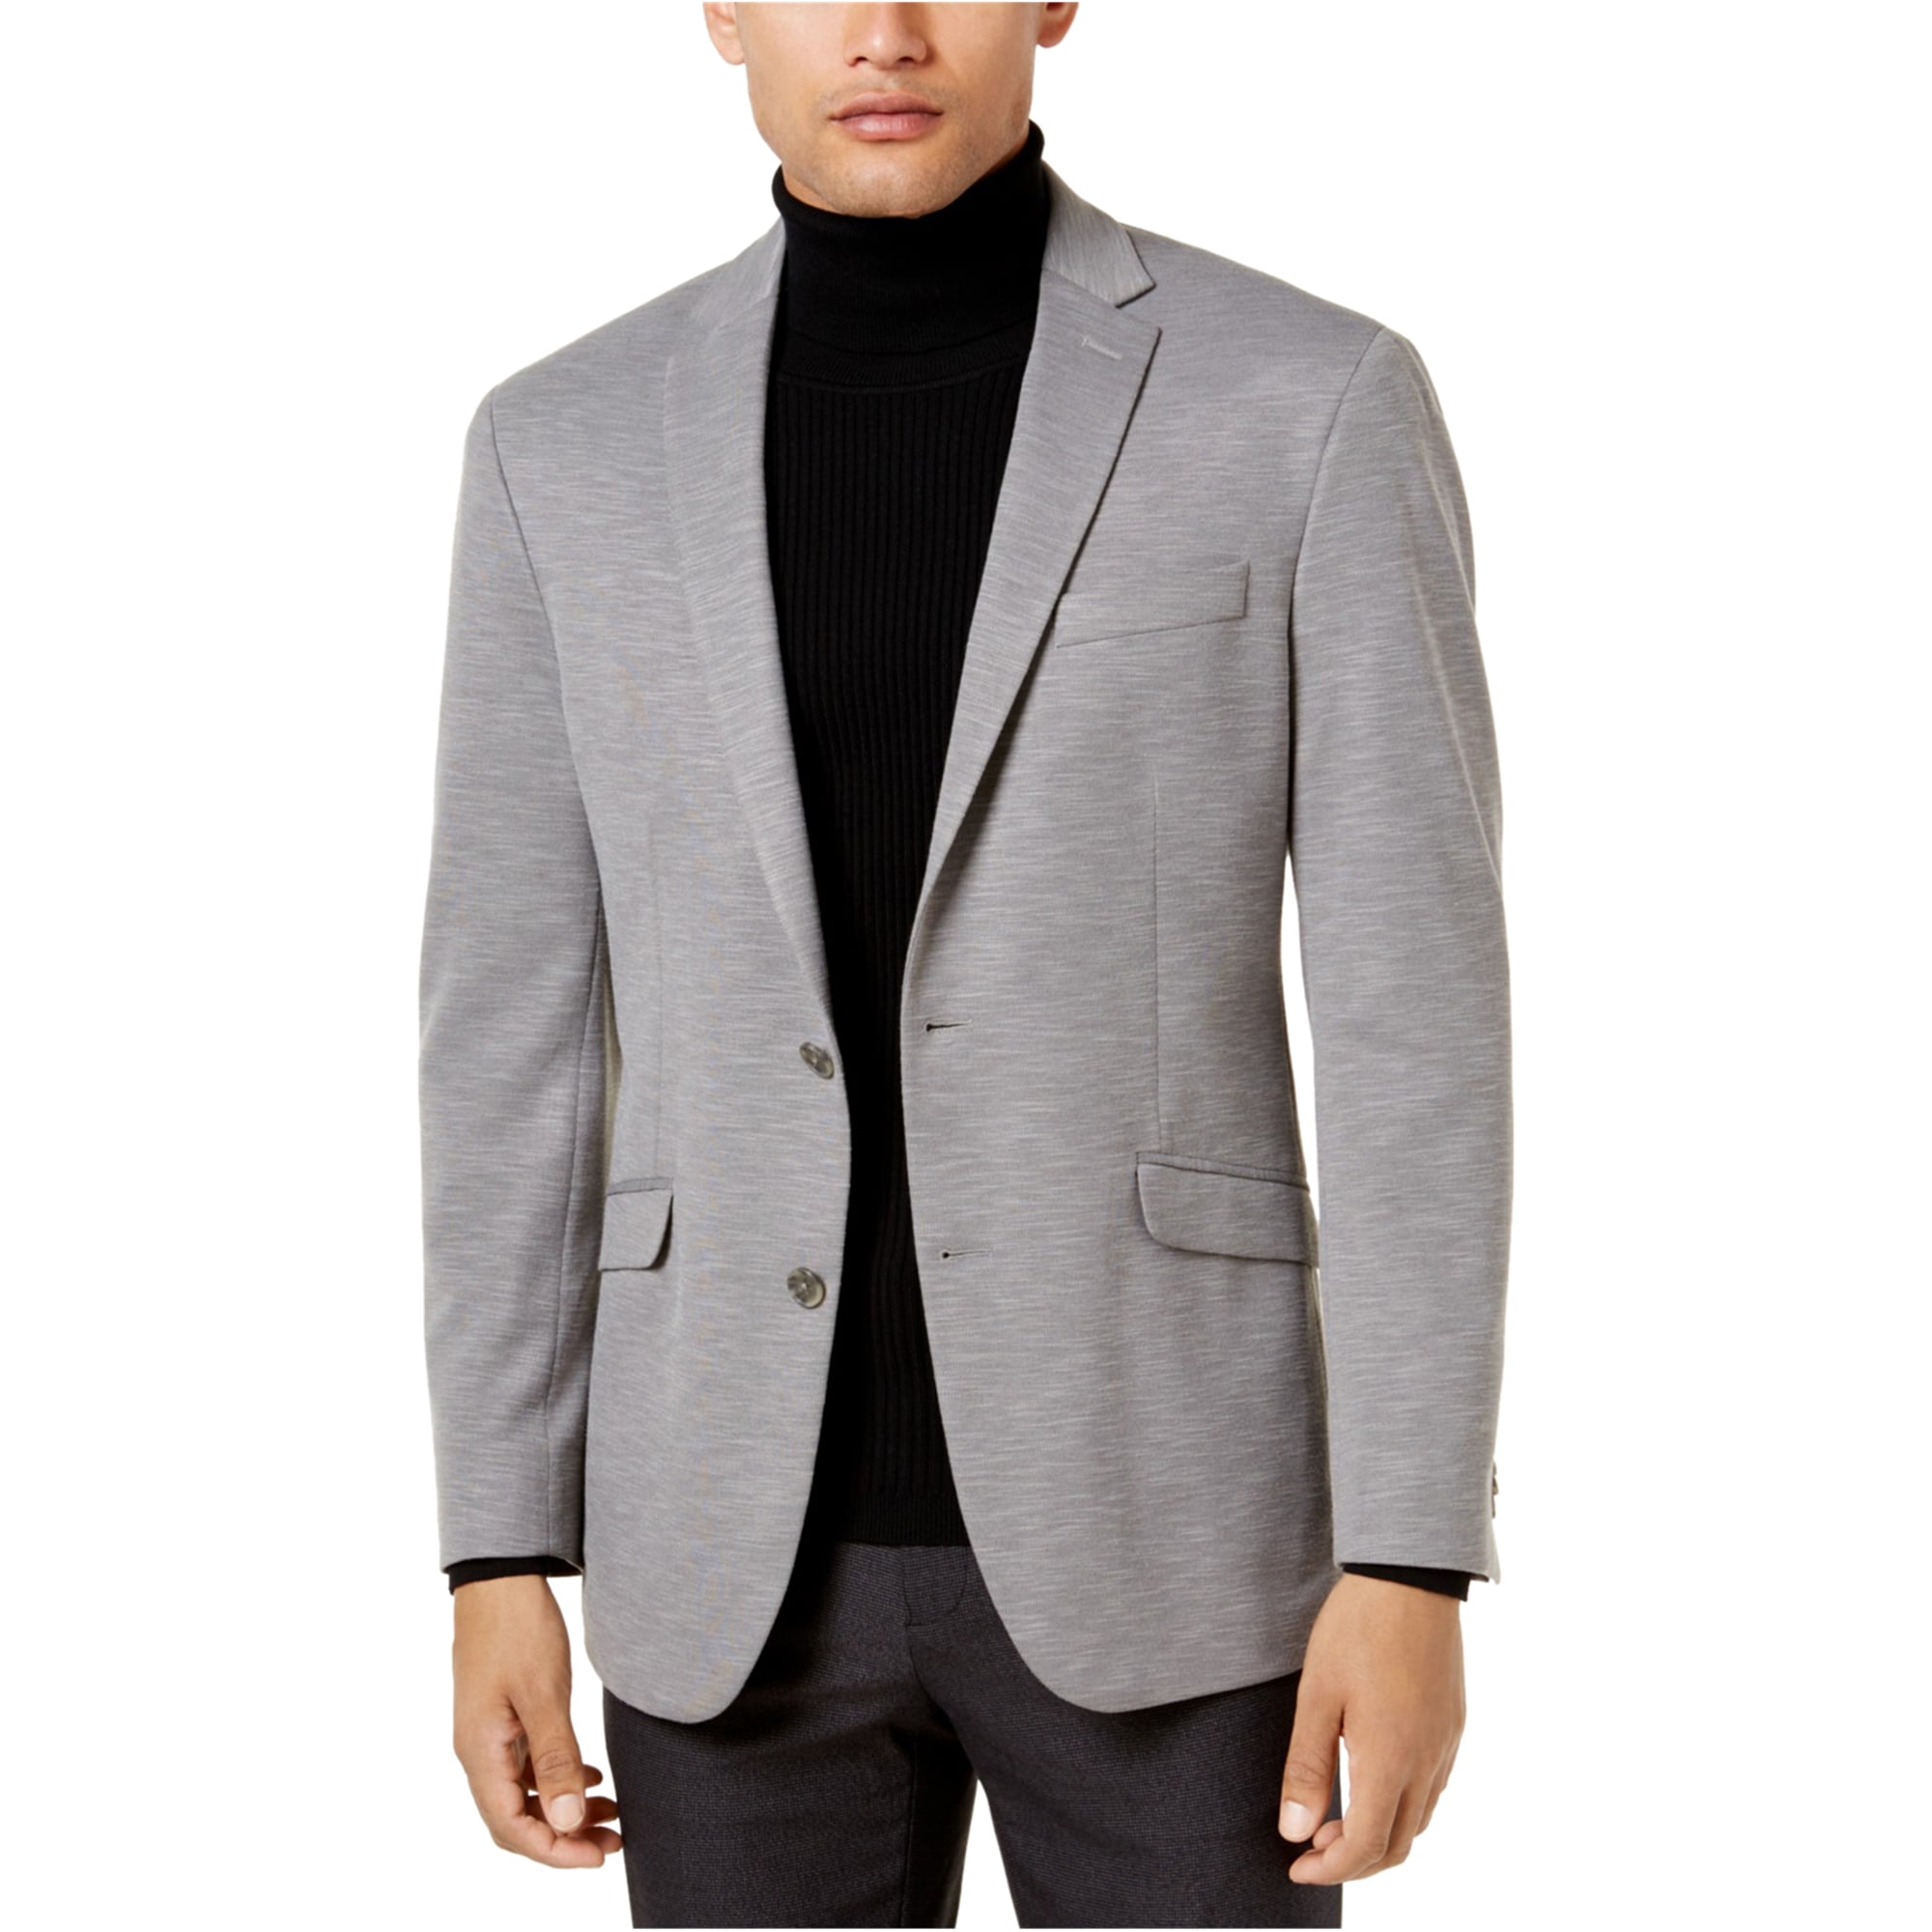 Kenneth Cole - Kenneth Cole Mens Slim Fit Two Button Blazer Jacket ...